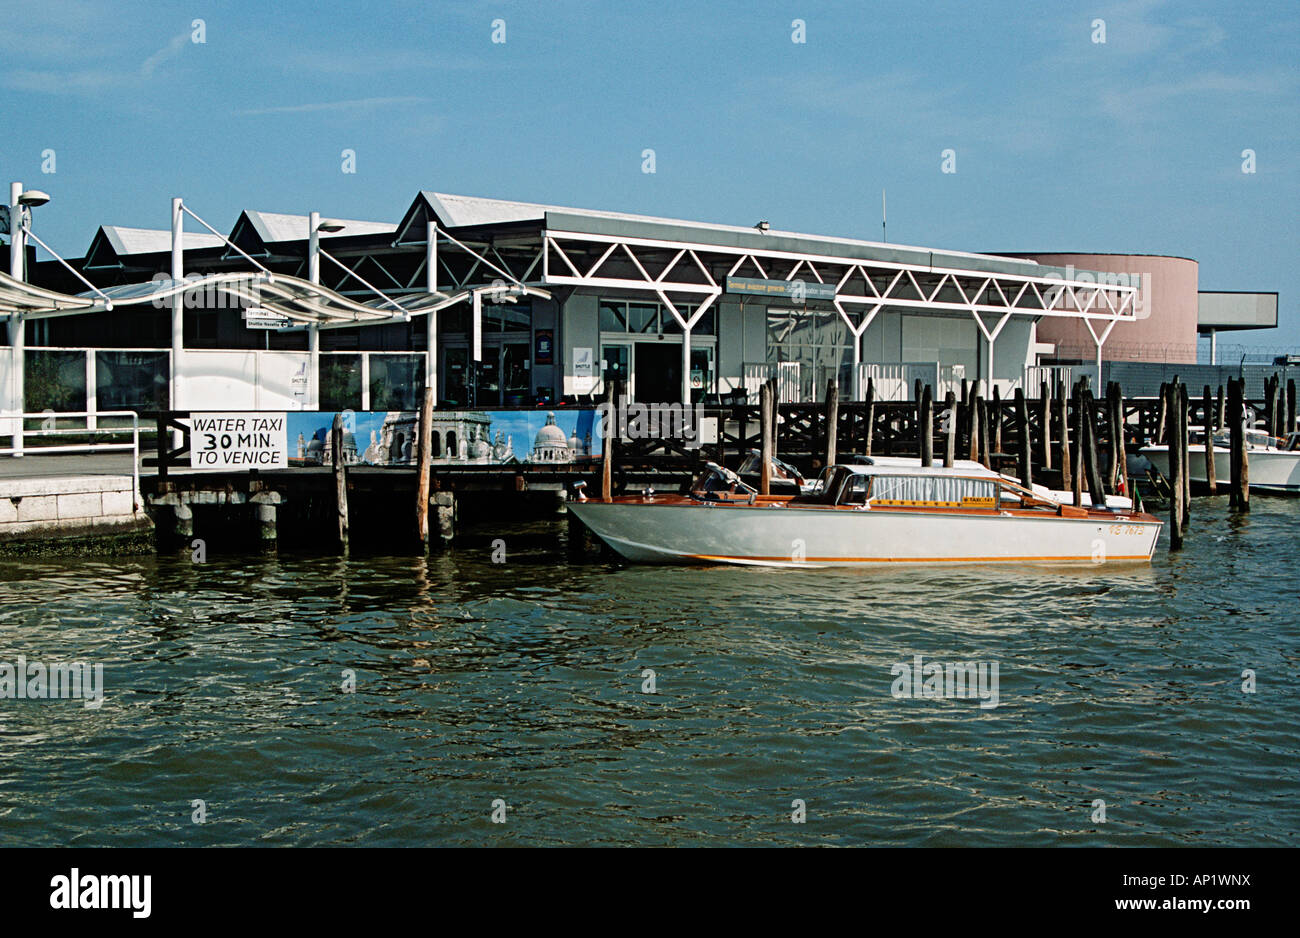 Water taxi at Marco Polo Airport, Venice, Italy Stock Photo - Alamy